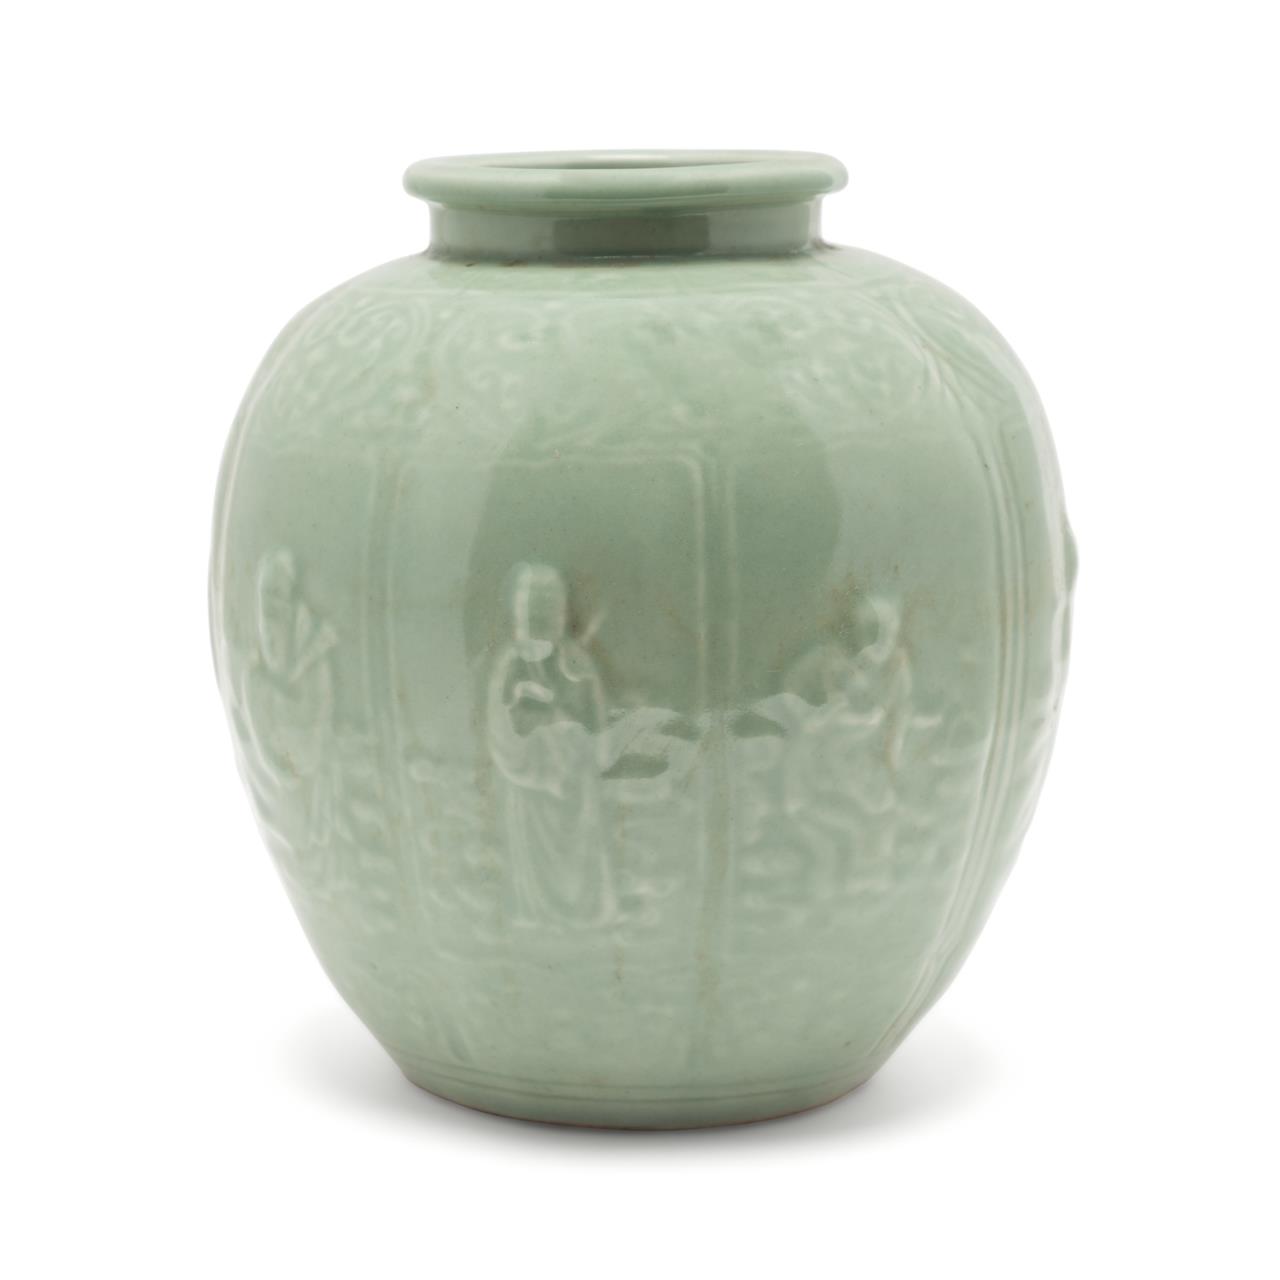 CHINESE CELADON EIGHT IMMORTAL